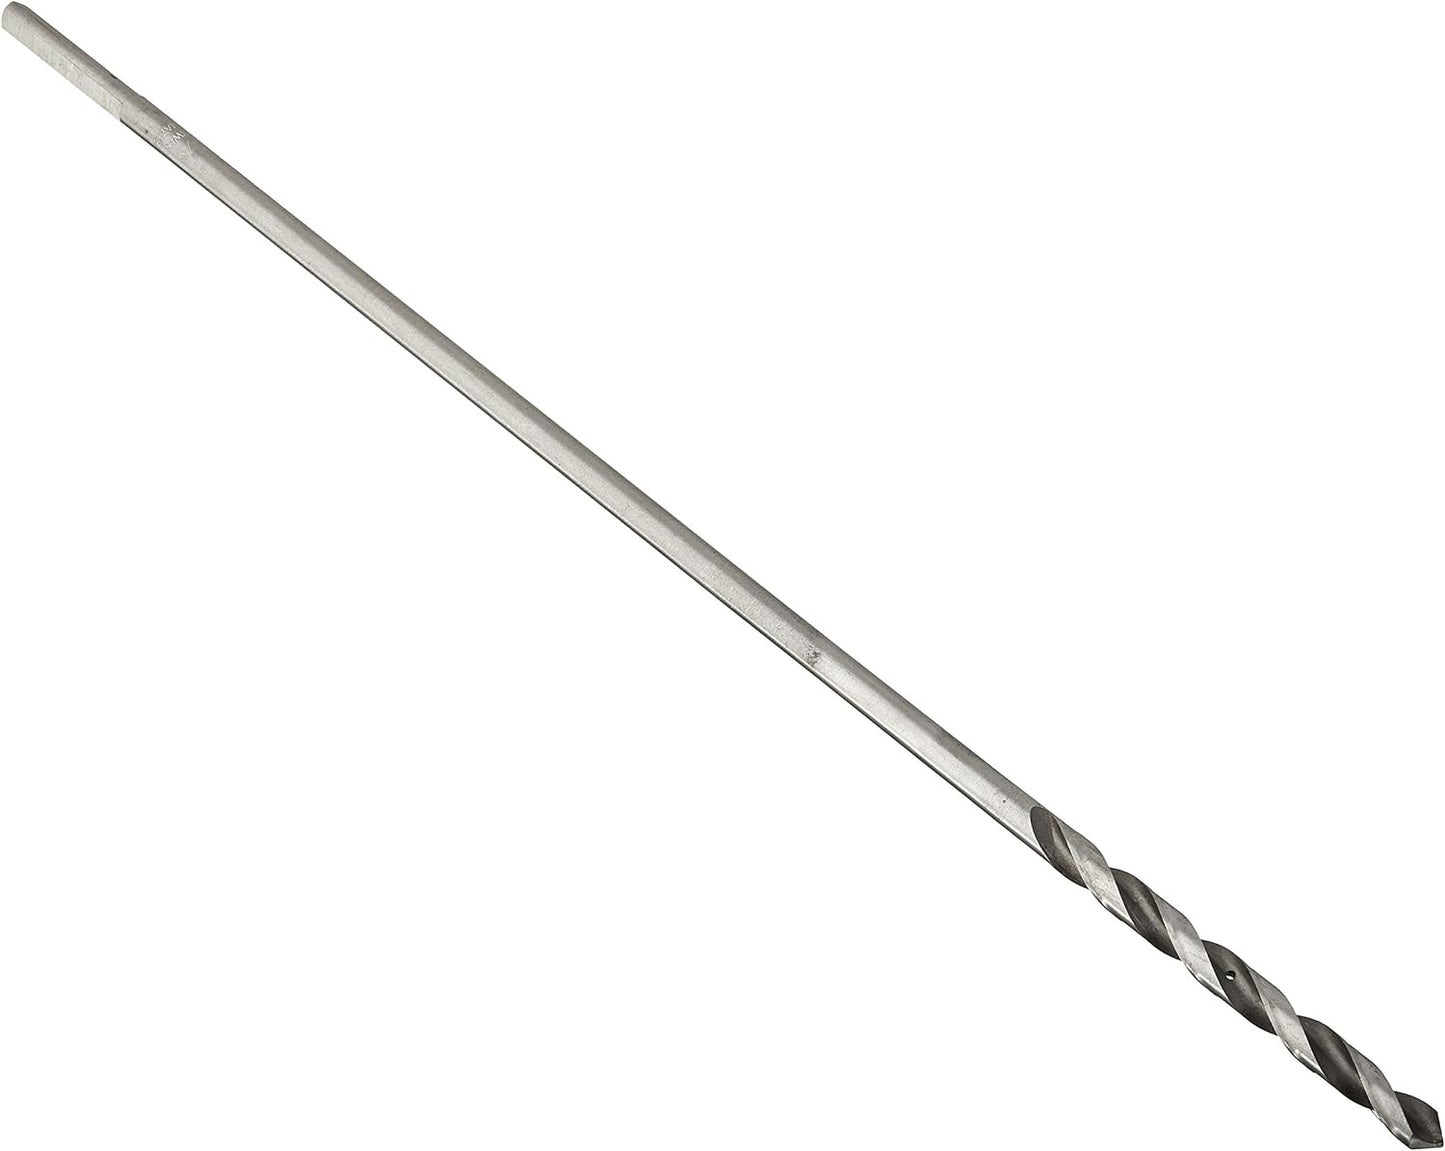 IRWIN 1890709 Straight Shank Installer Drill Bit for Wood, 18-Inch by 3/8-Inch `